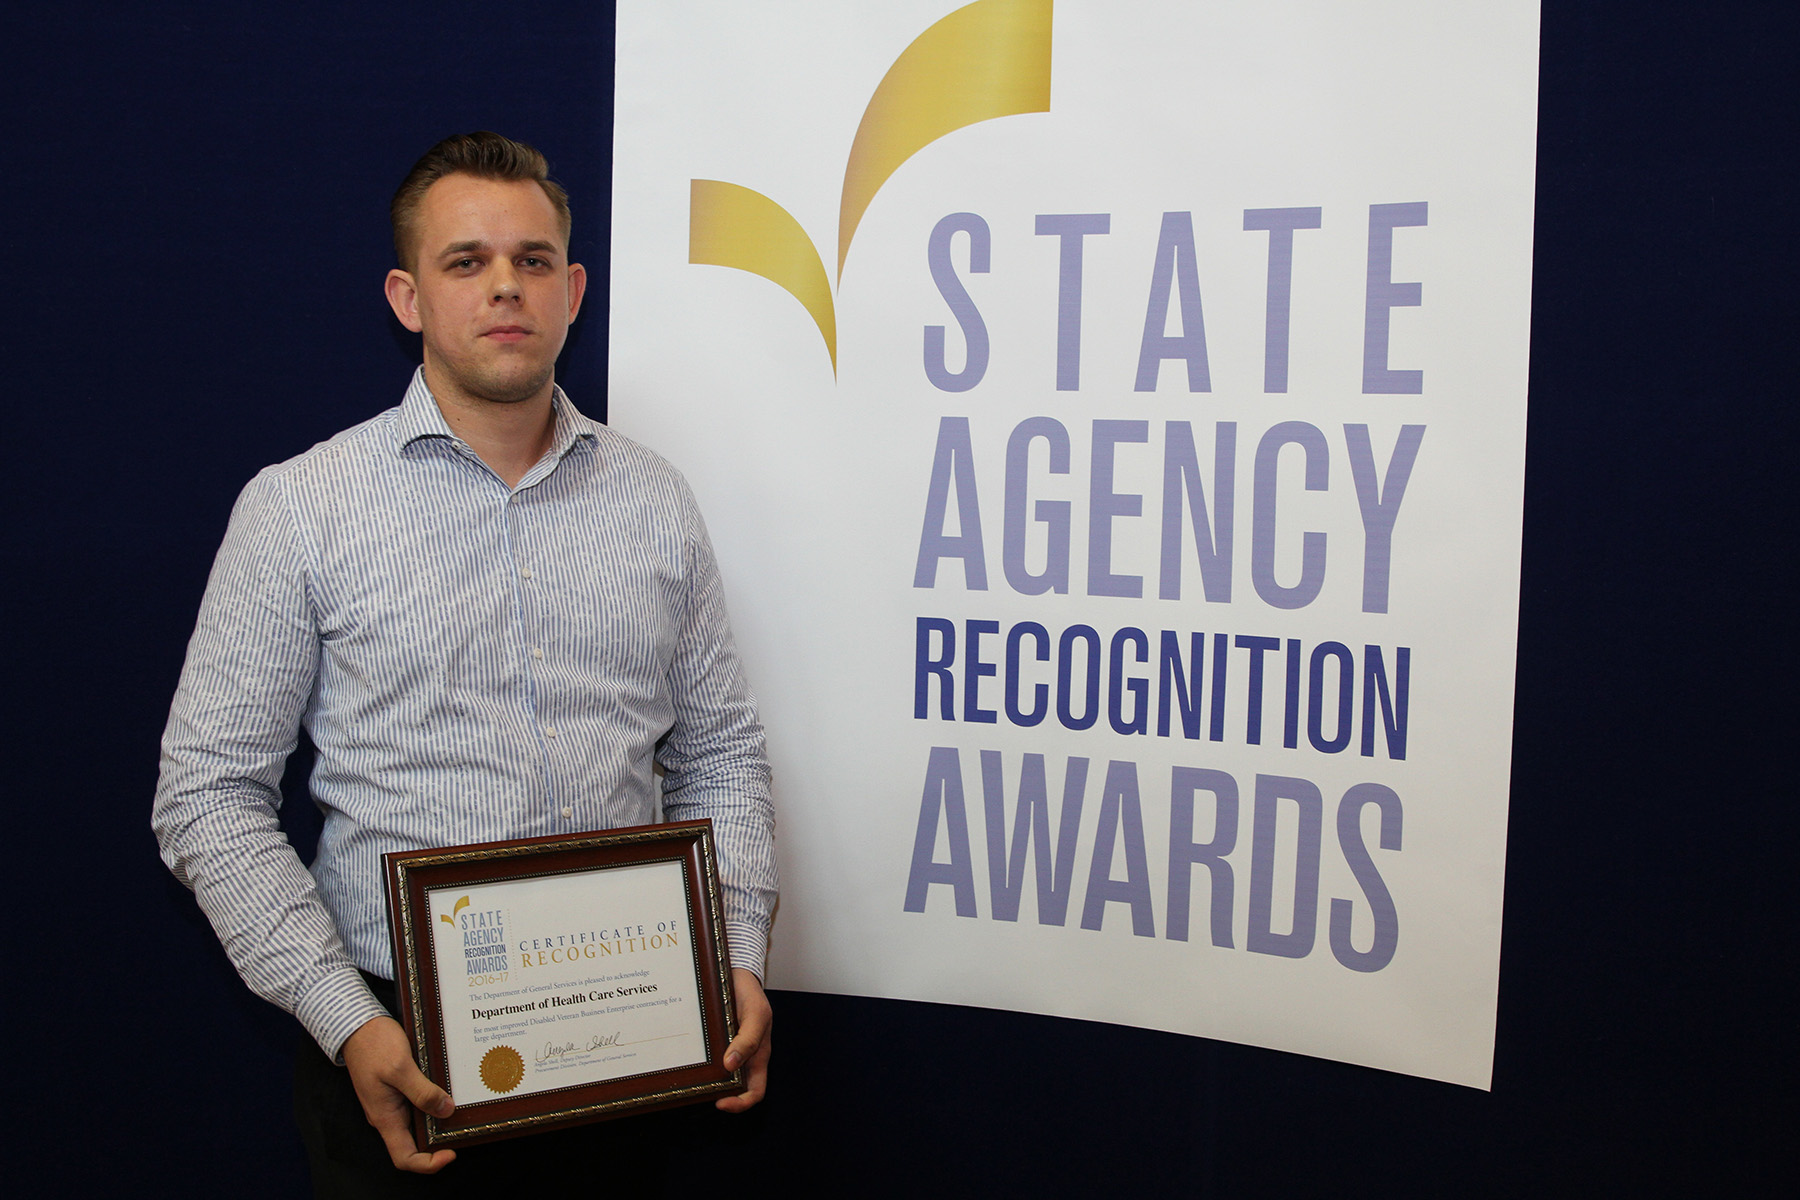 Max Lyulkin accepts the most improved DVBE participation award for the Department of Health Care Services for the large agency category